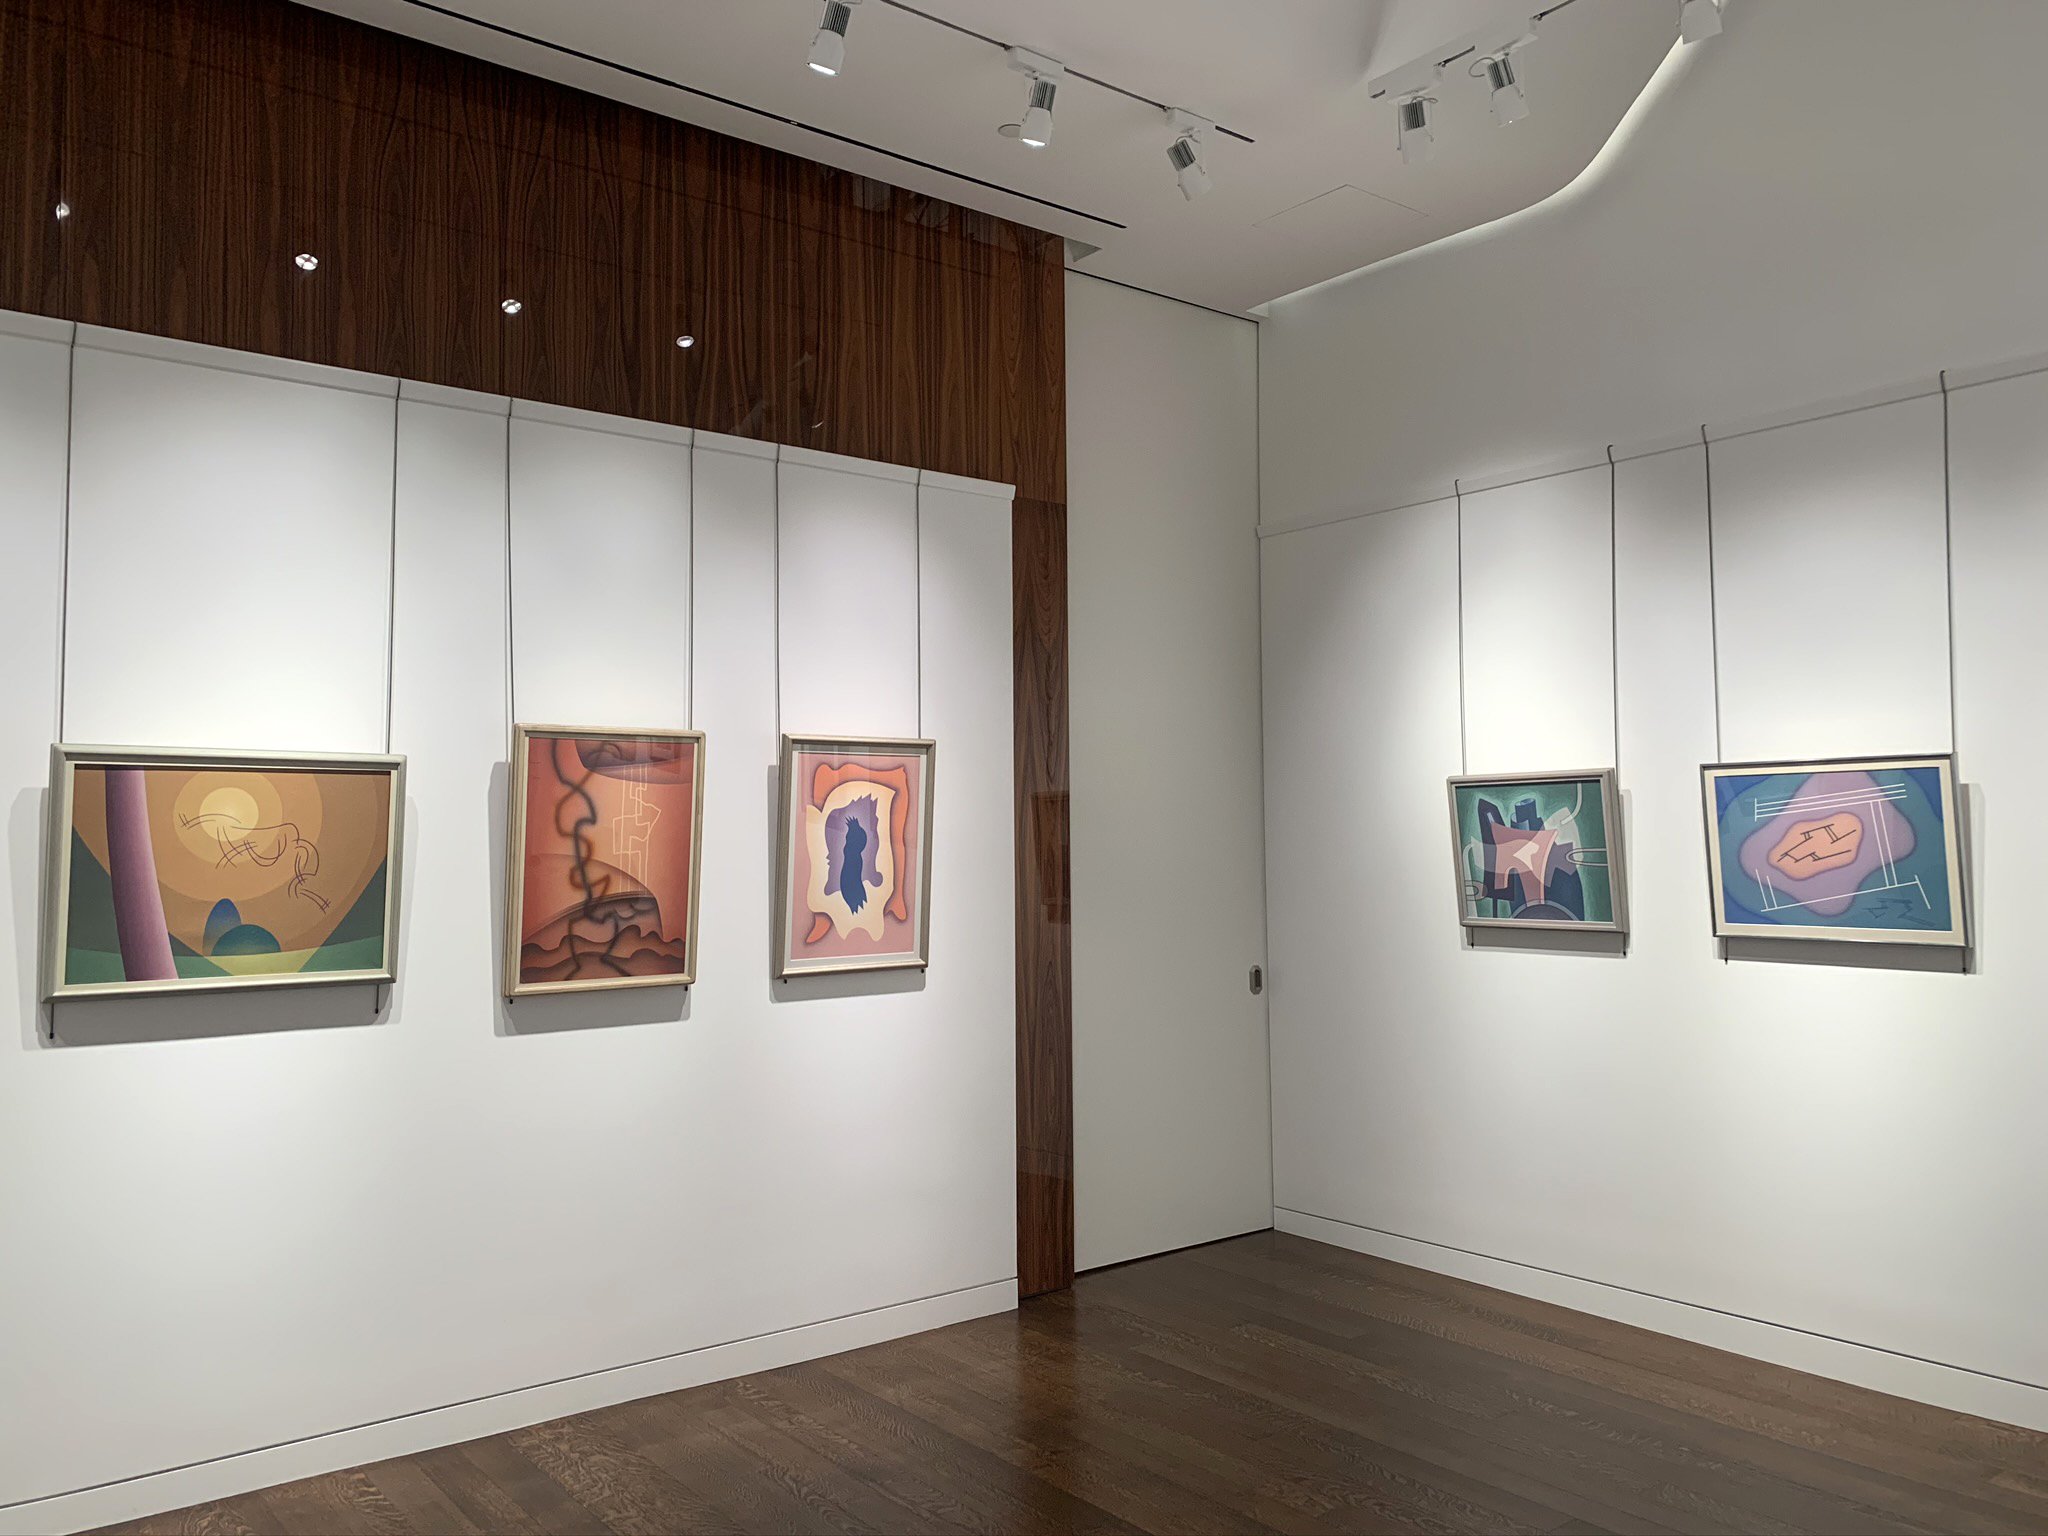  EMIL BISTTRAM AND RAYMOND JONSON: FOUNDERS OF THE TRANSCENDENTAL PAINTING GROUP May 20-October 16, 2020  